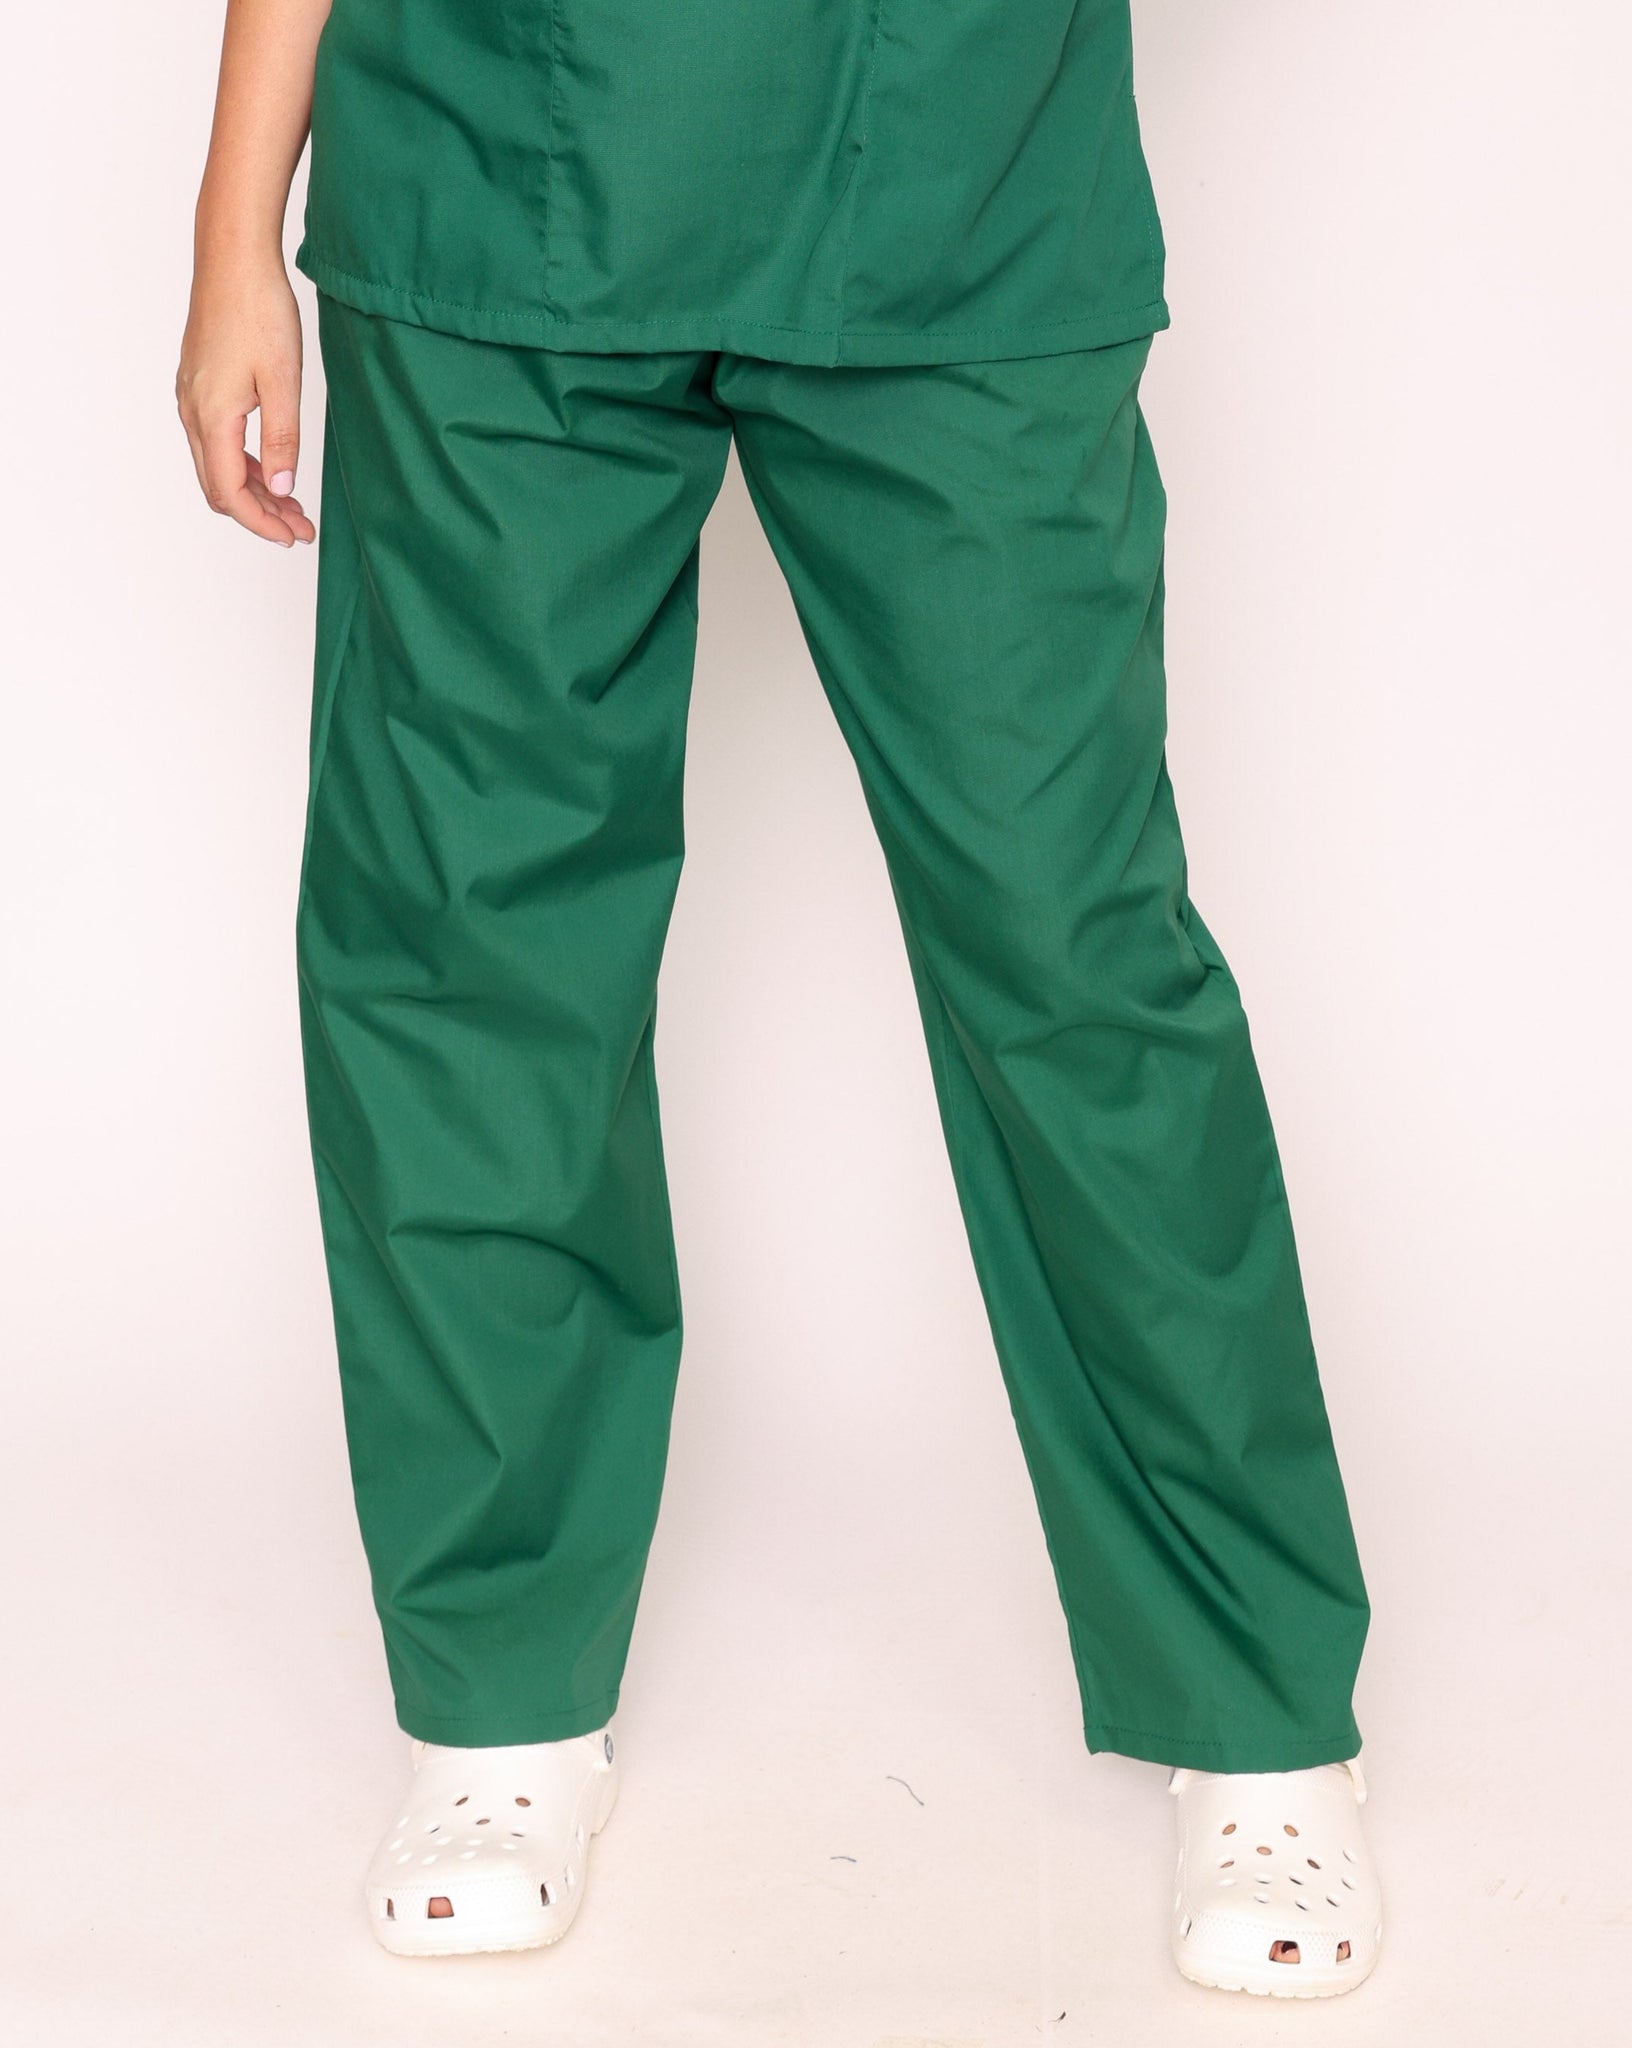 Unisex Lightweight Scrub Trousers, Healthcare Trousers